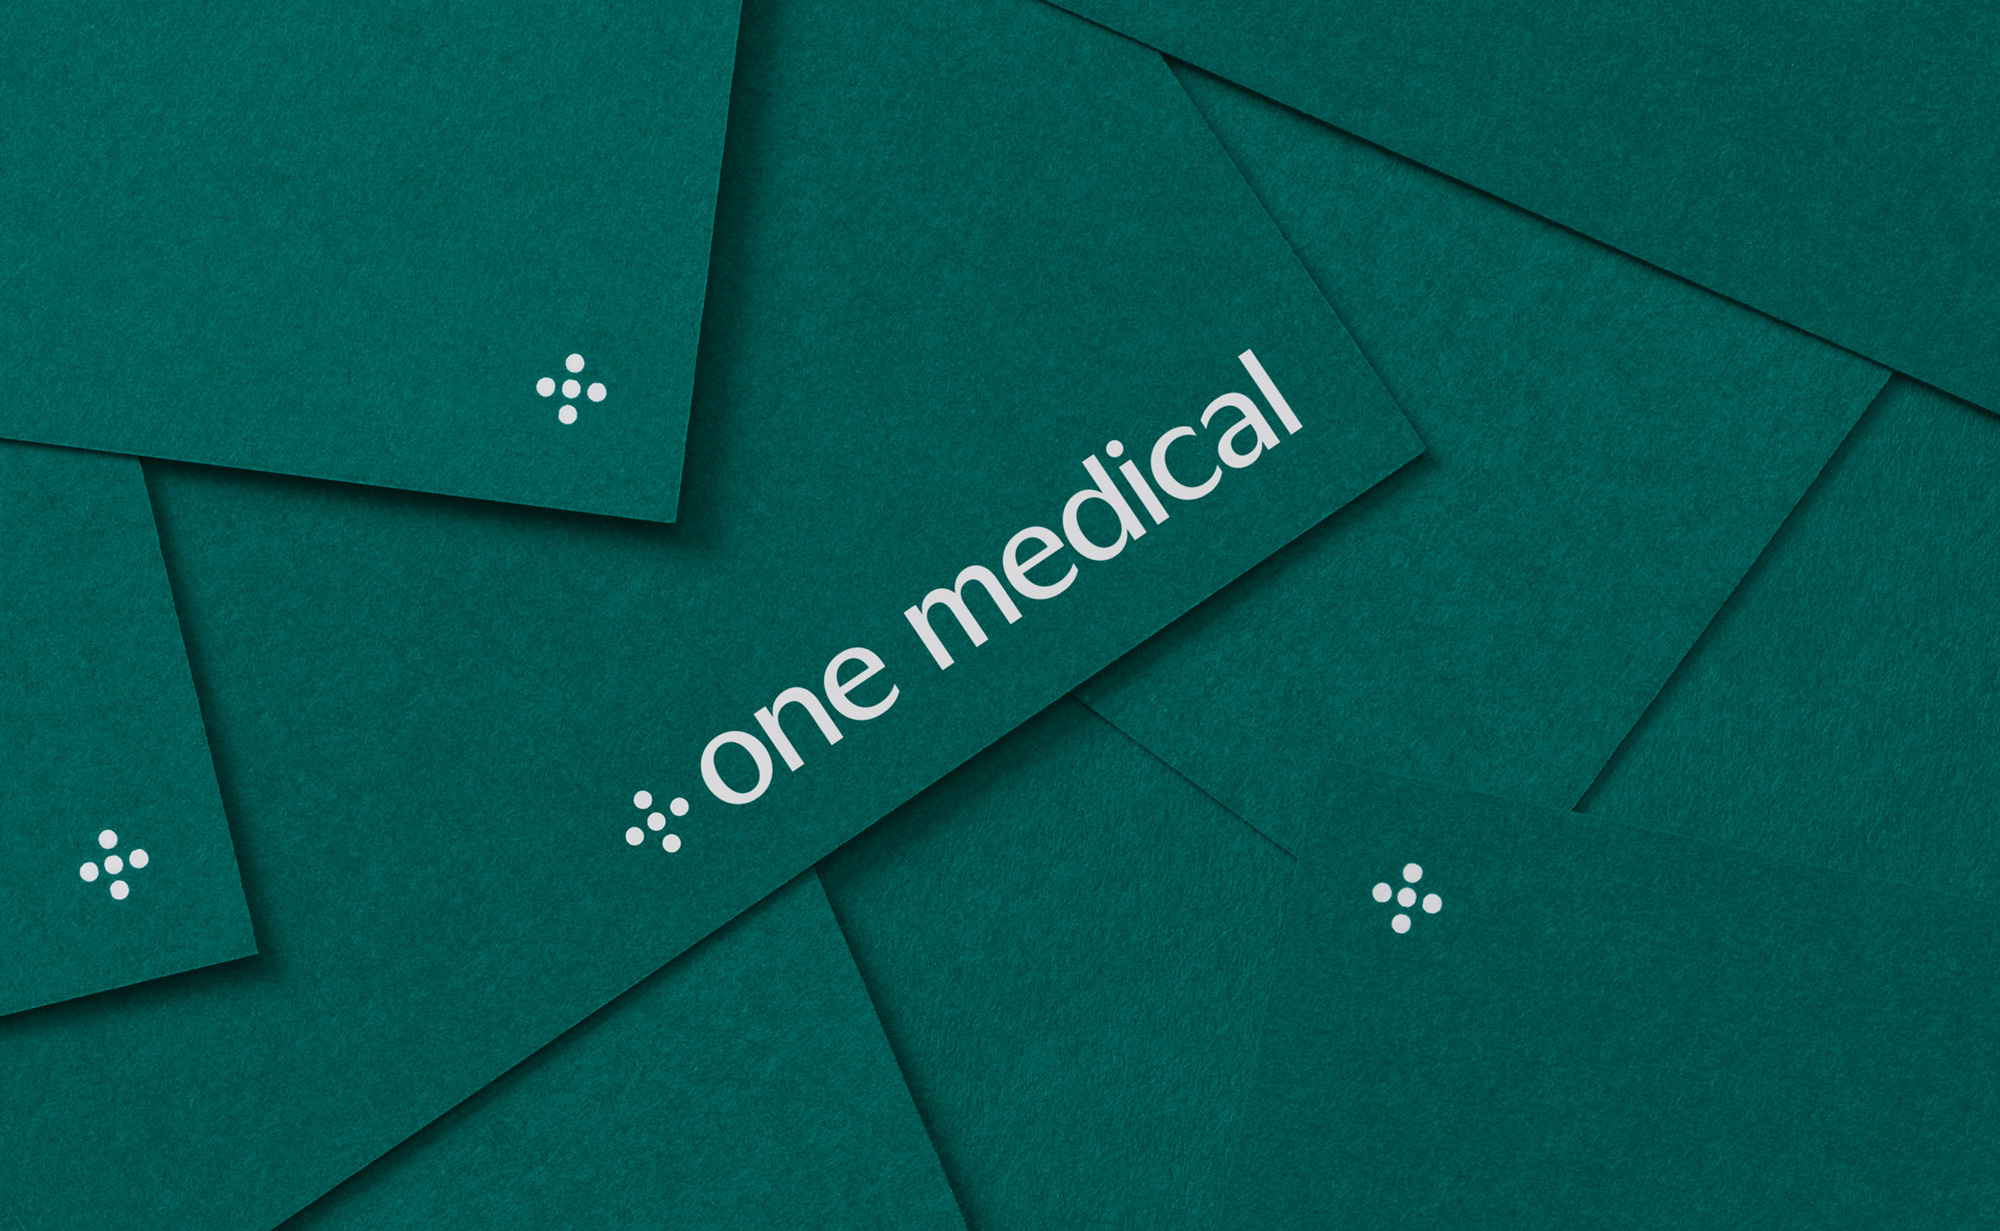 New Logo and Identity for One Medical by Moniker and In-house